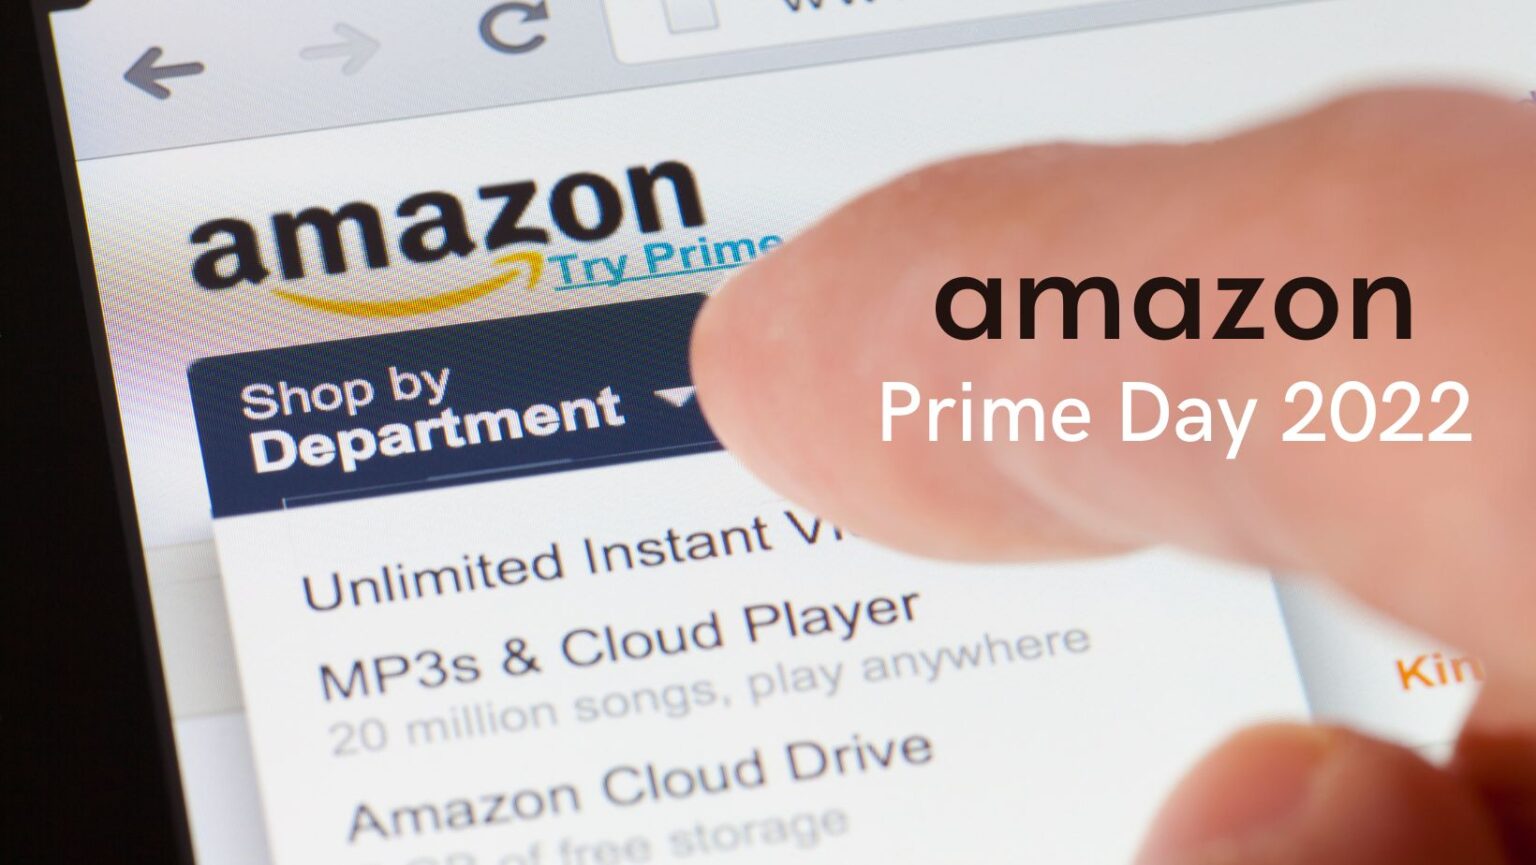 Amazon’s annual Prime Day event is back this July 1213